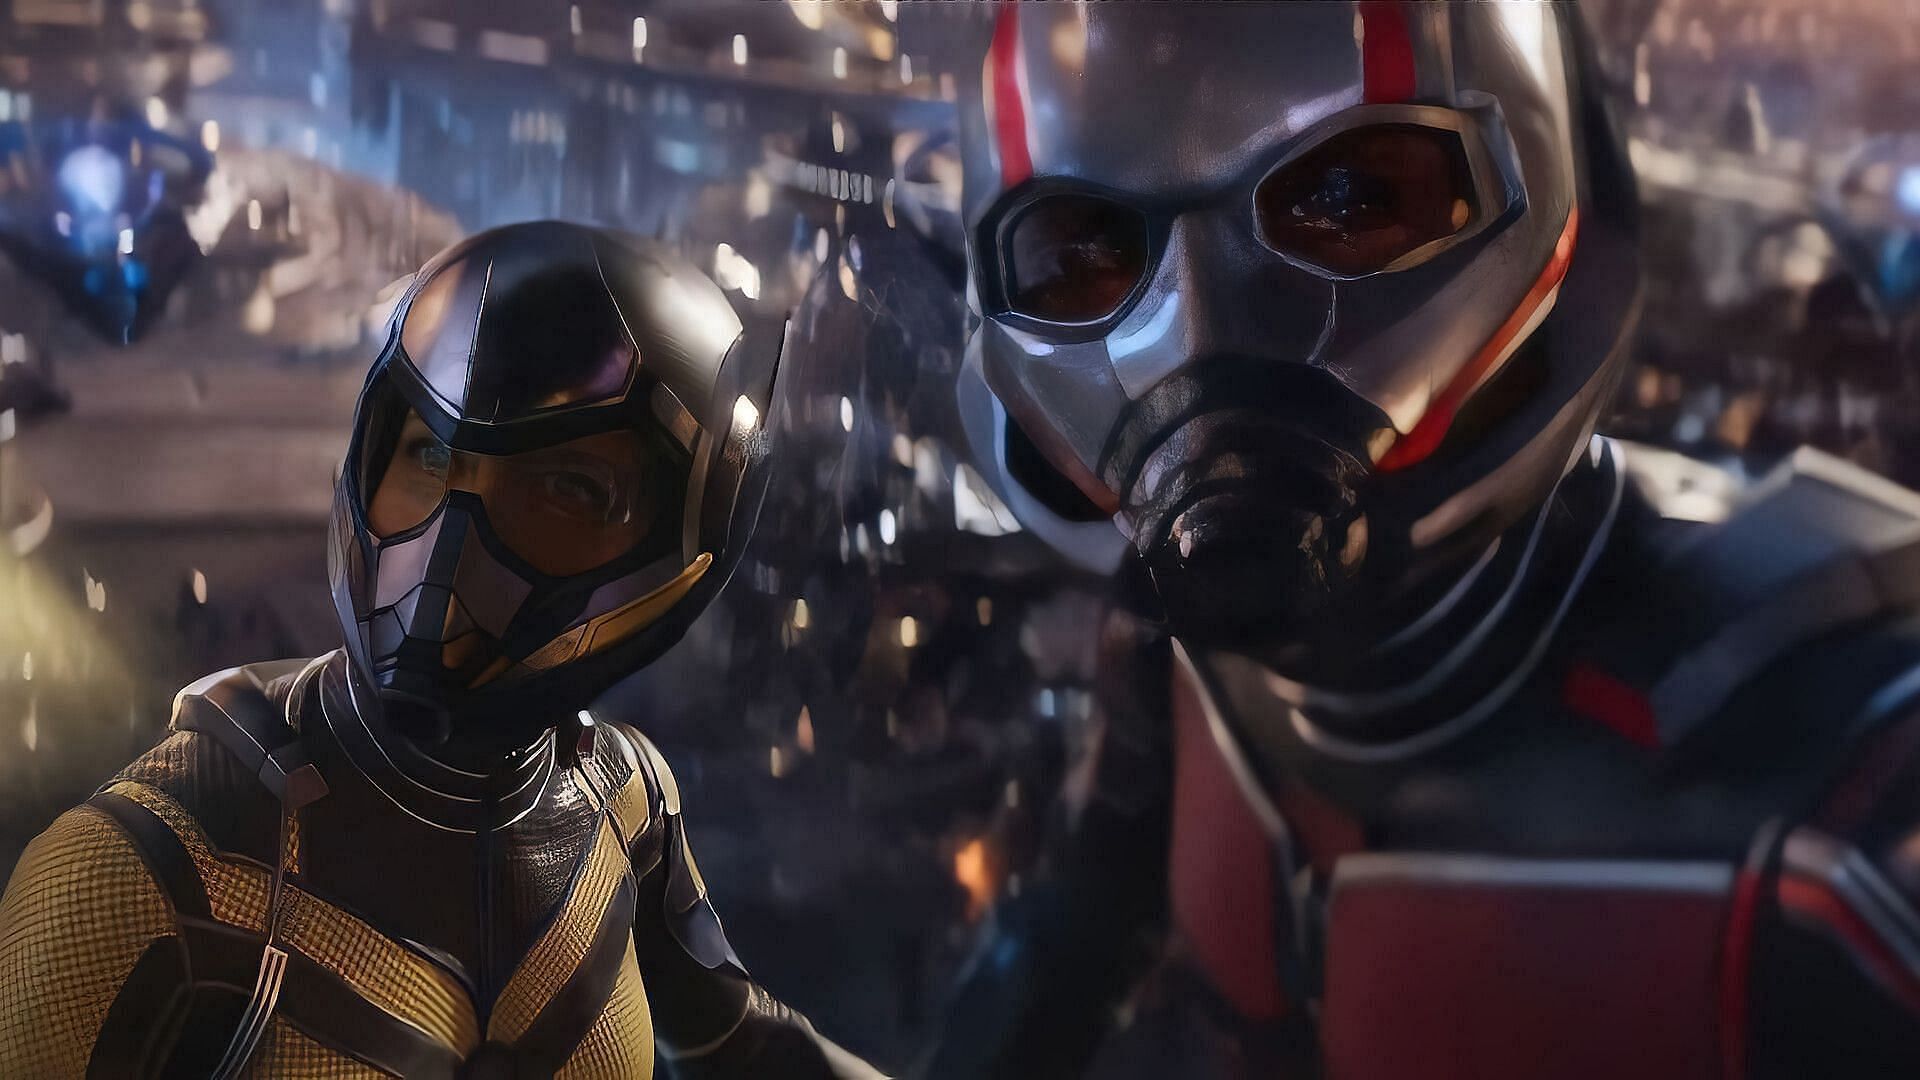 Ant-Man and Wasp in Ant-Man 3 (Image Credit: Marvel Studios)